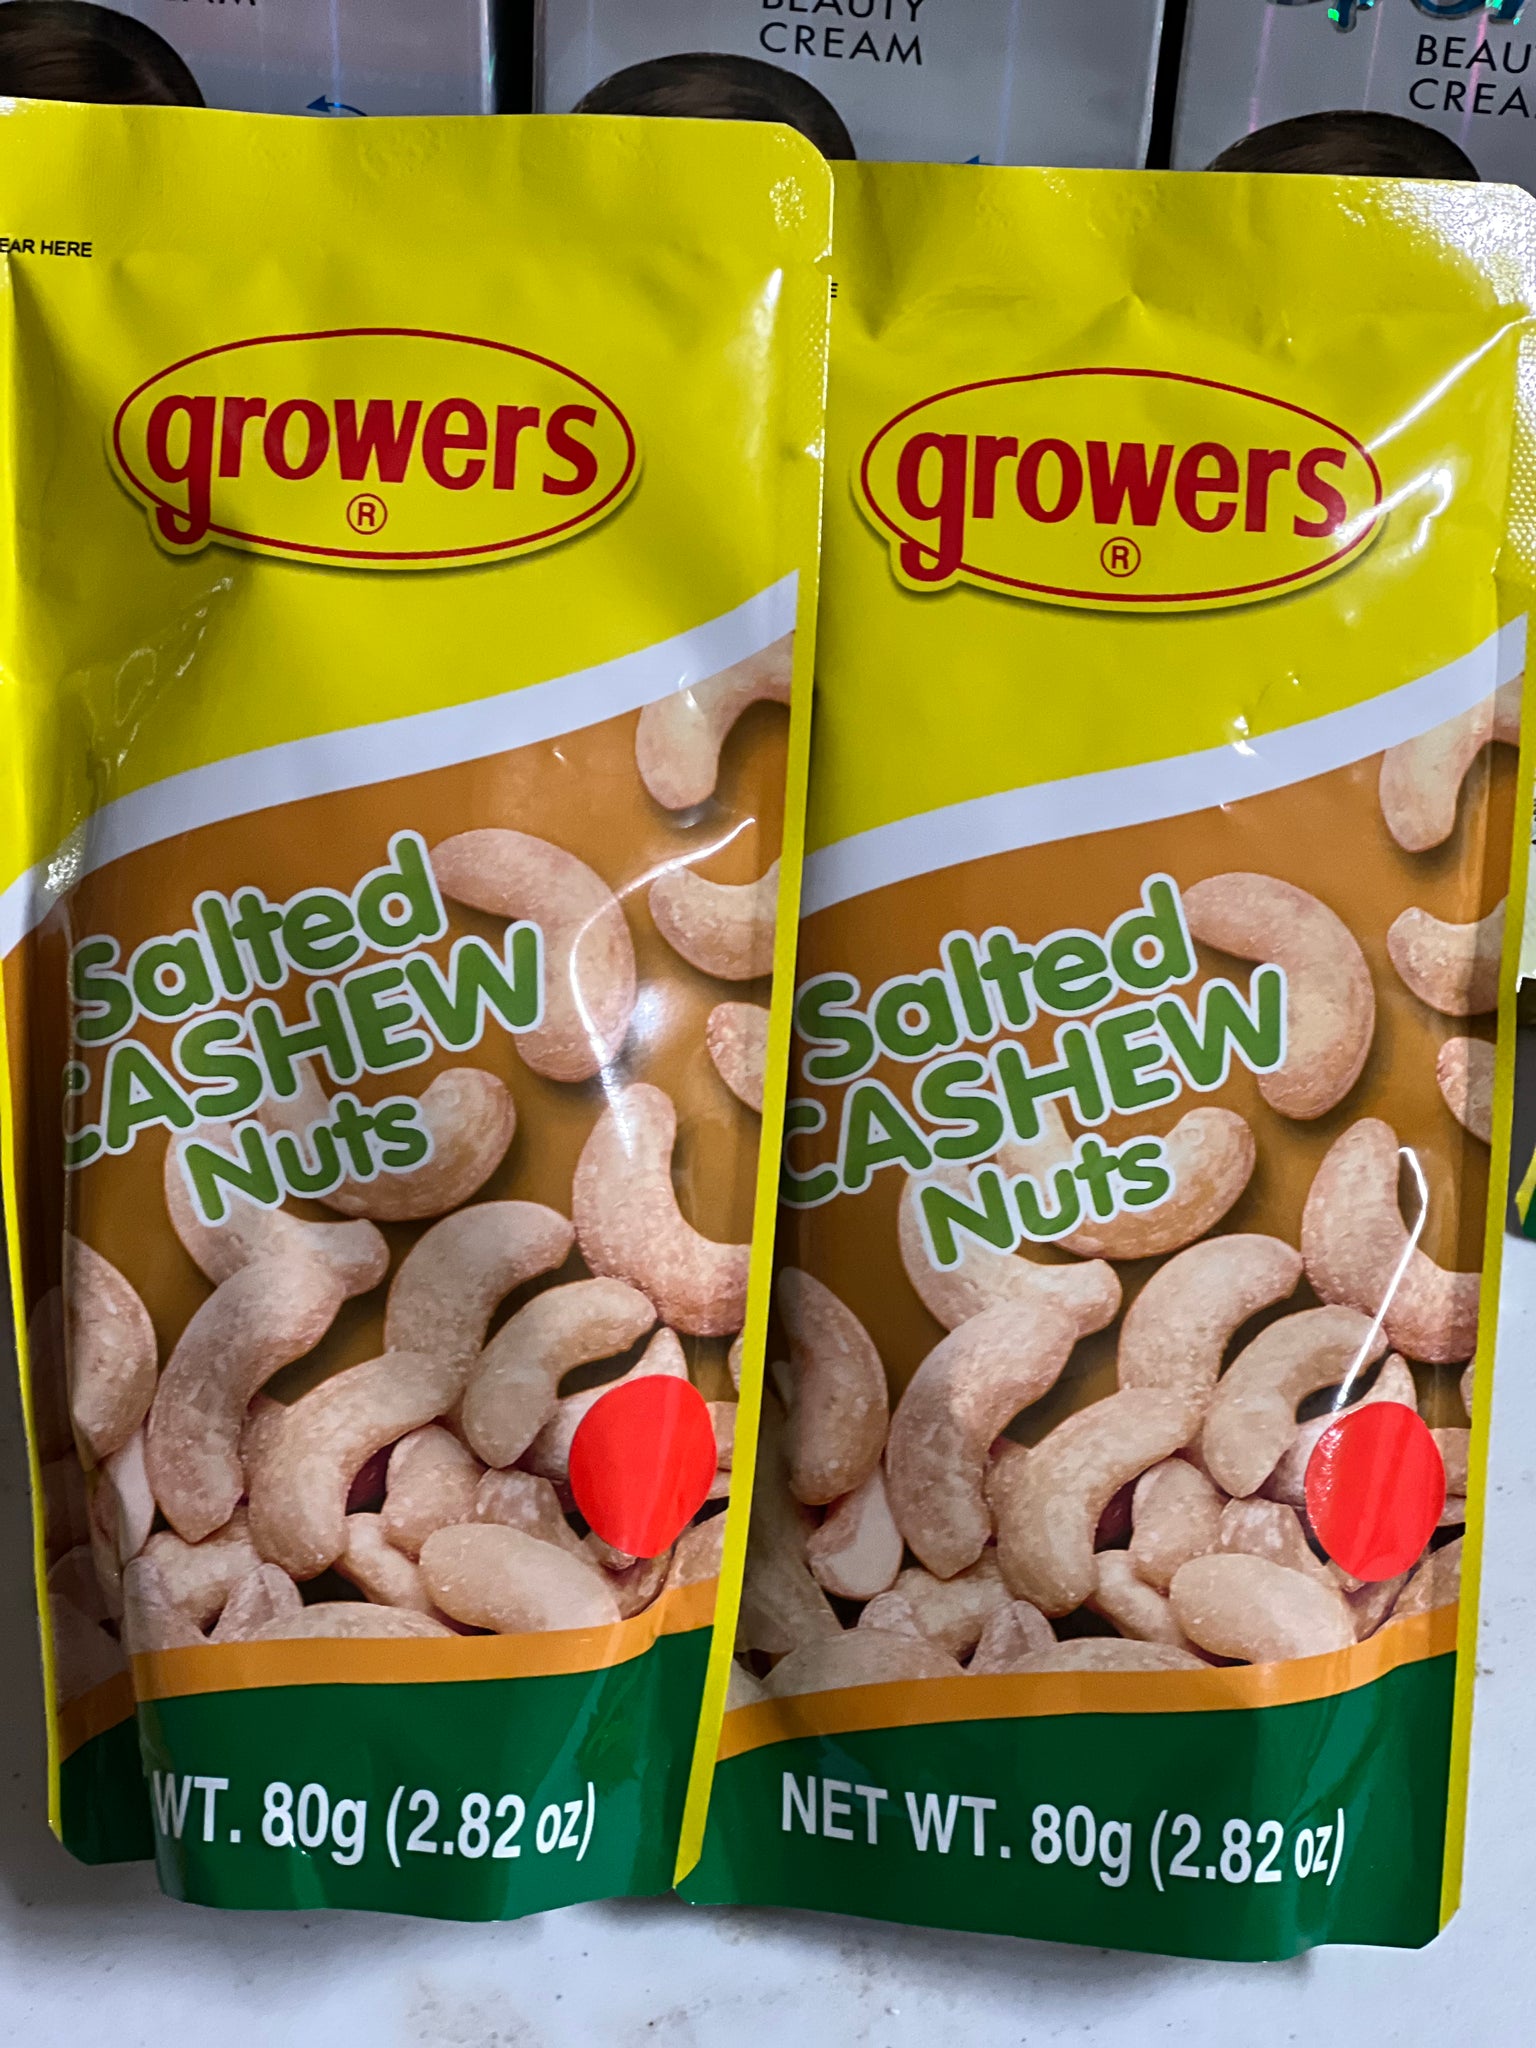 Growers Salted Cashew Nuts